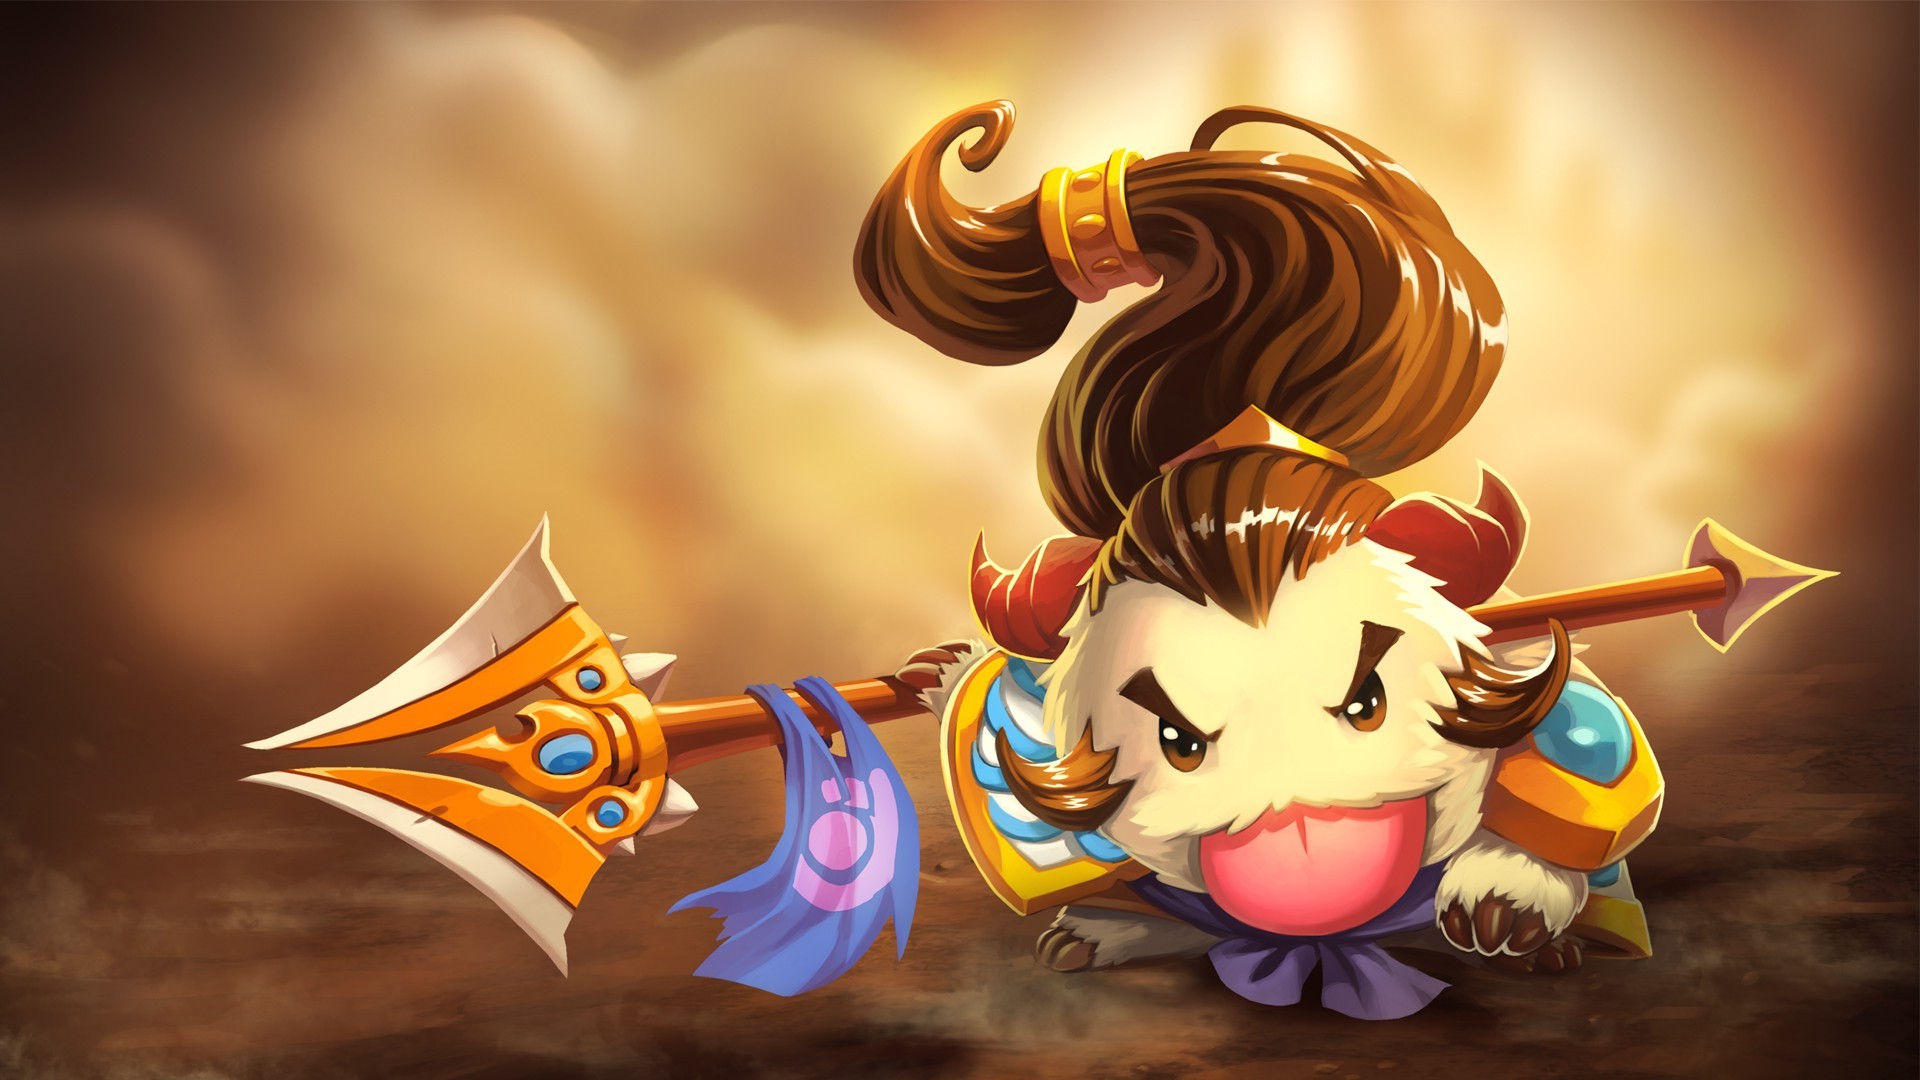 League Of Legends Poro Xin Zhao Wallpapers Hd Desktop And Mobile Backgrounds